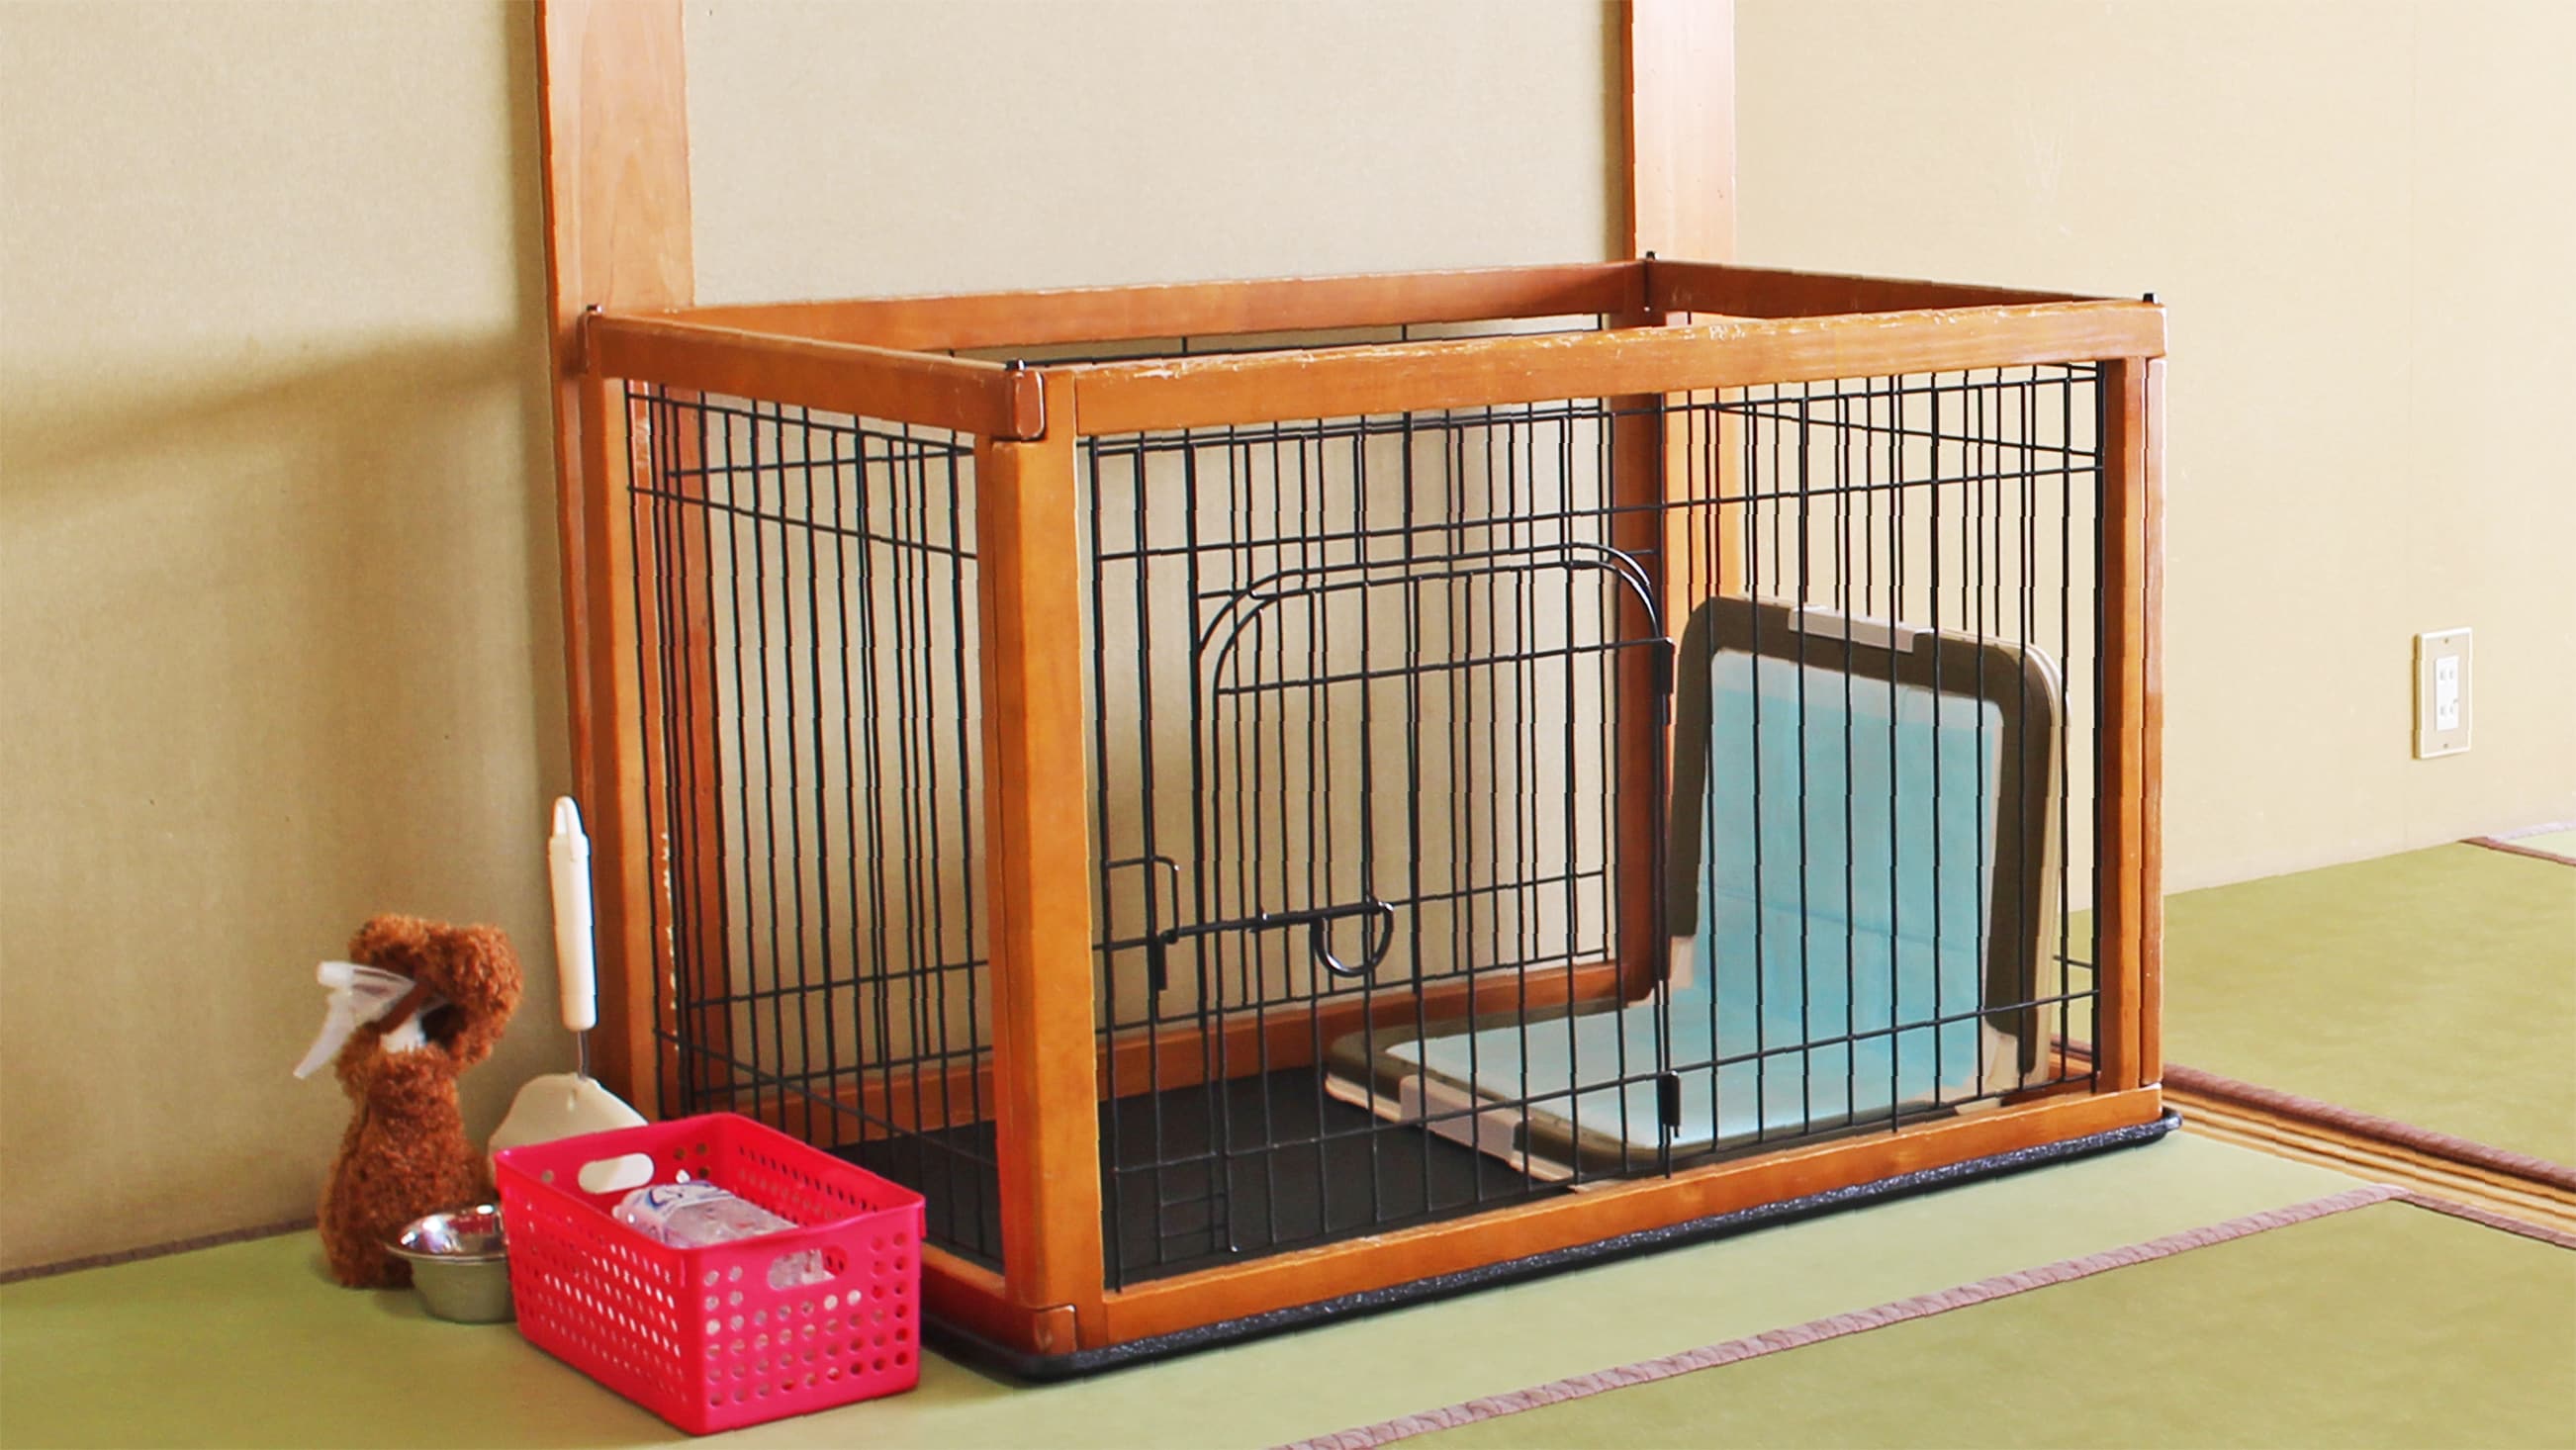 ◆ Room: Stay with your dog ♪ Japanese-style room gauge